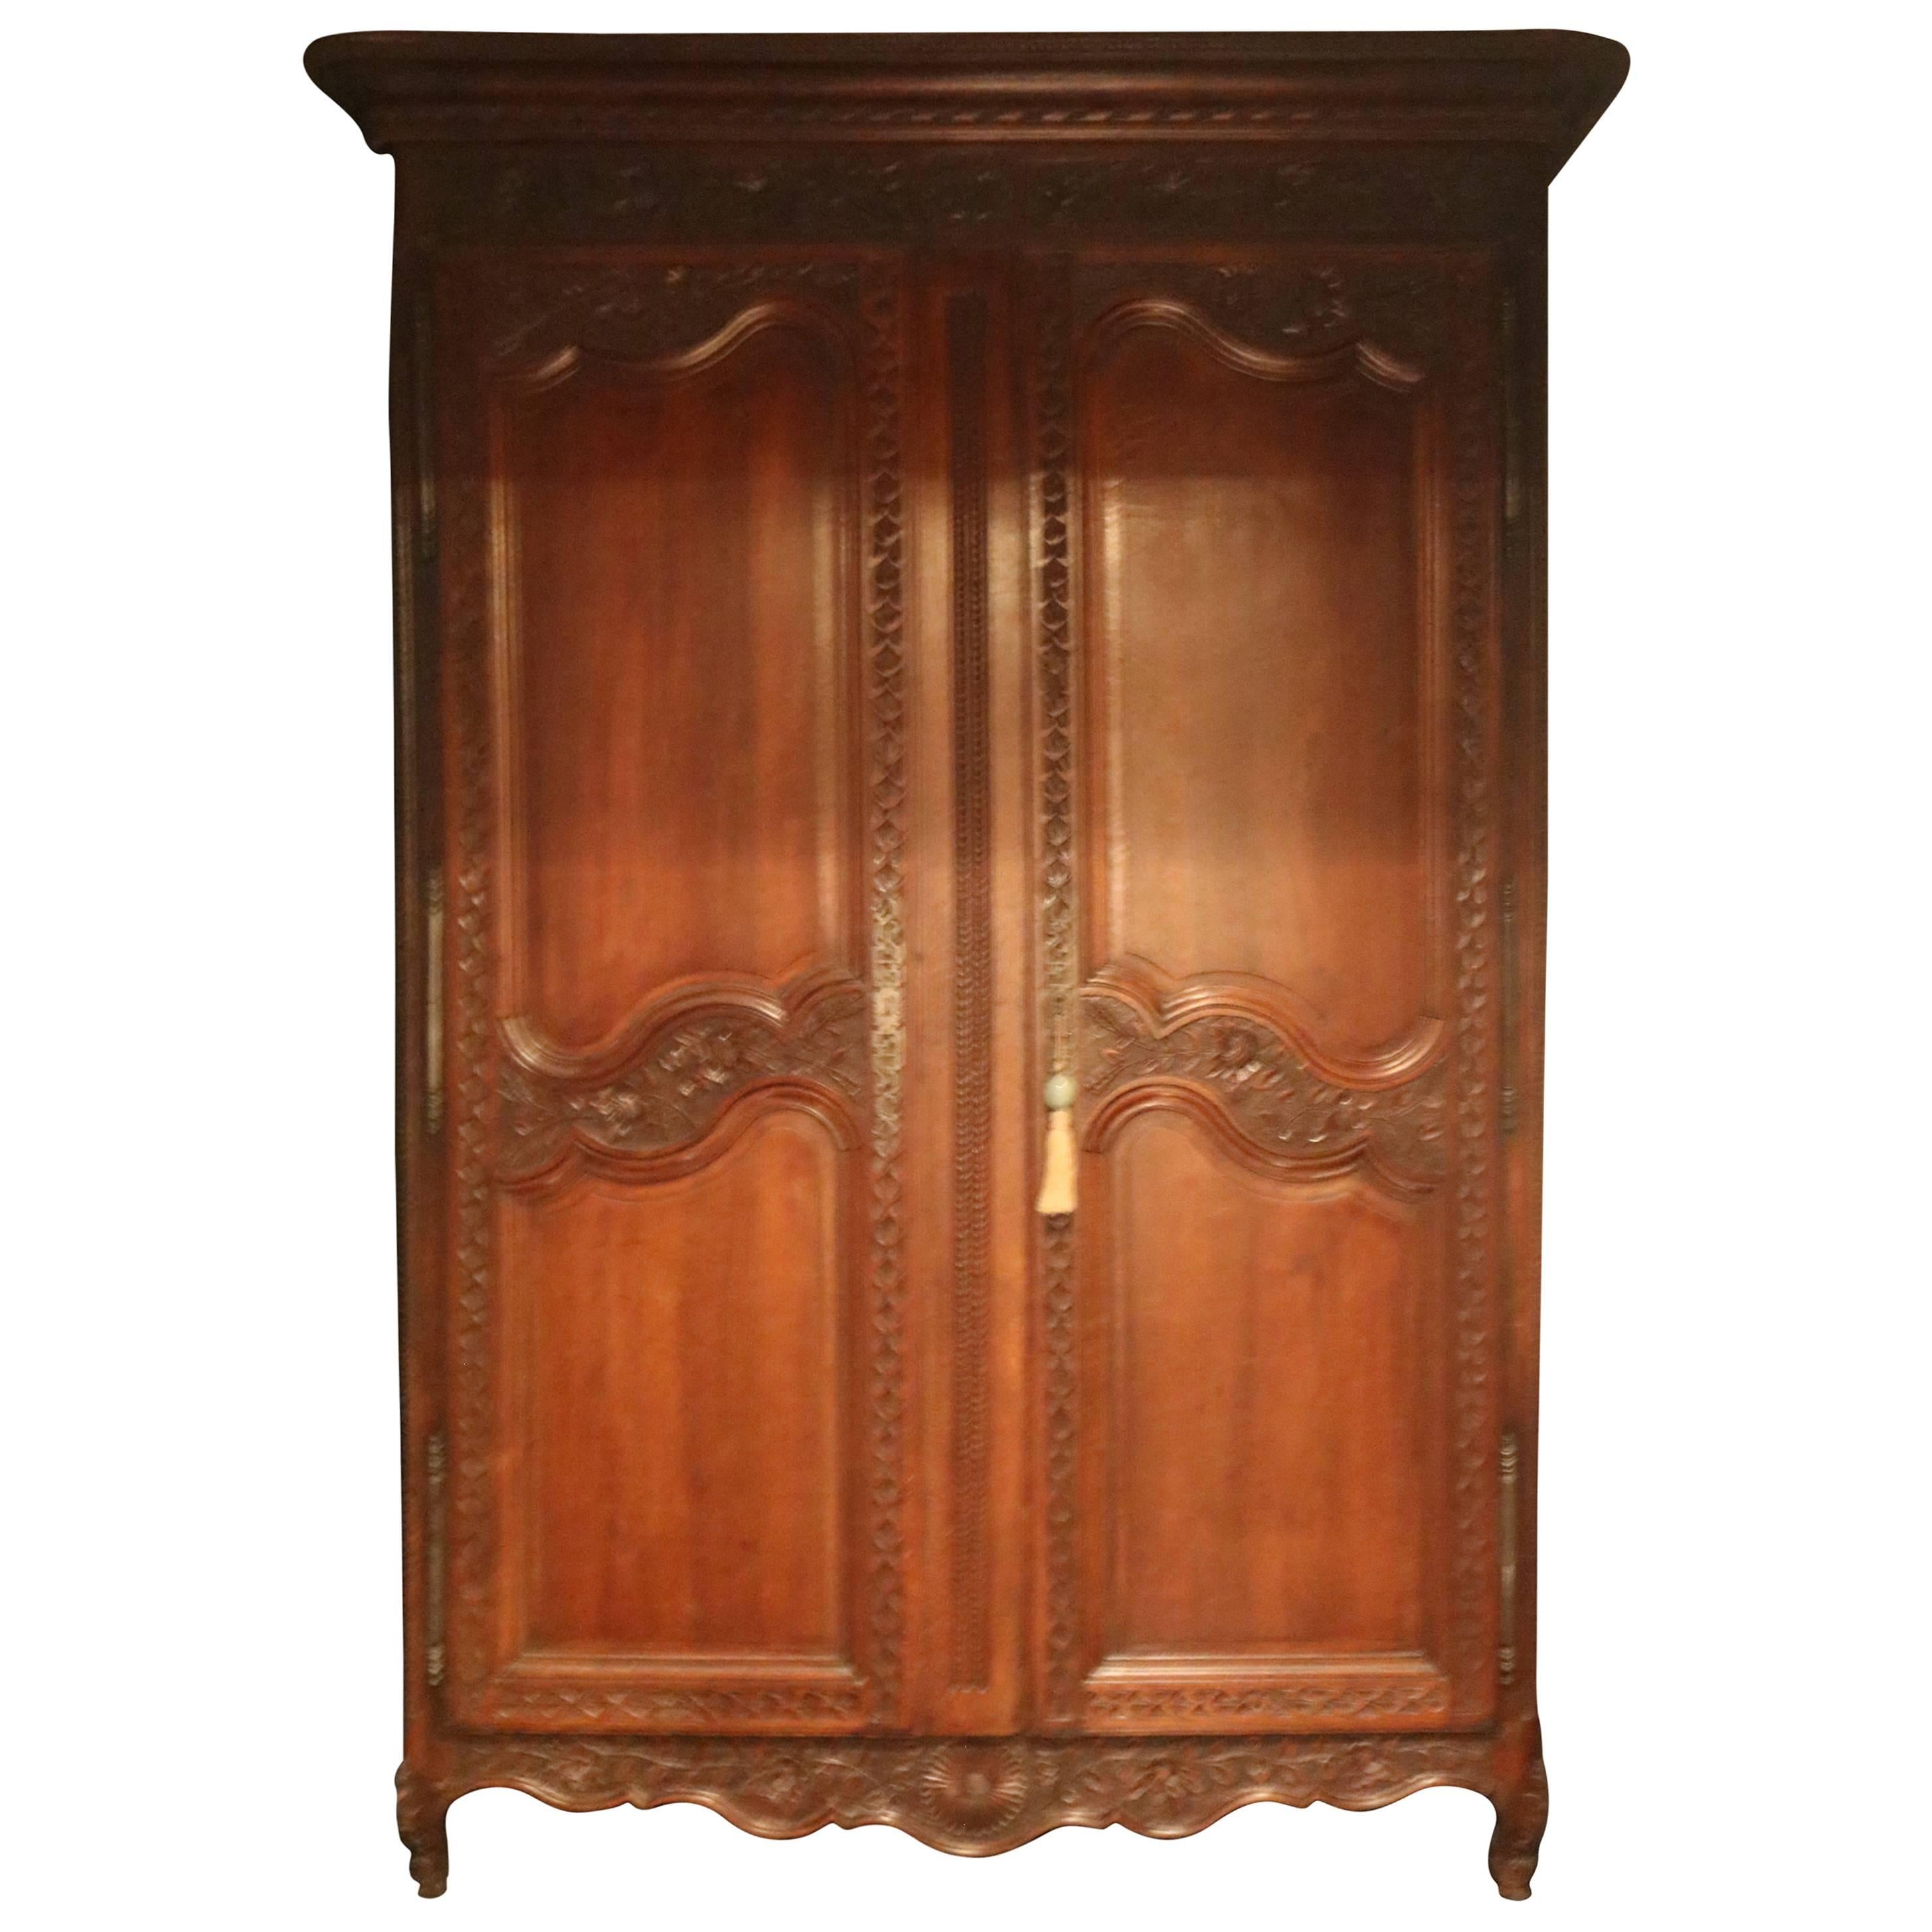 Remarkable French Walnut 19th Century Armoire, That Is a Clothes Closet For Sale